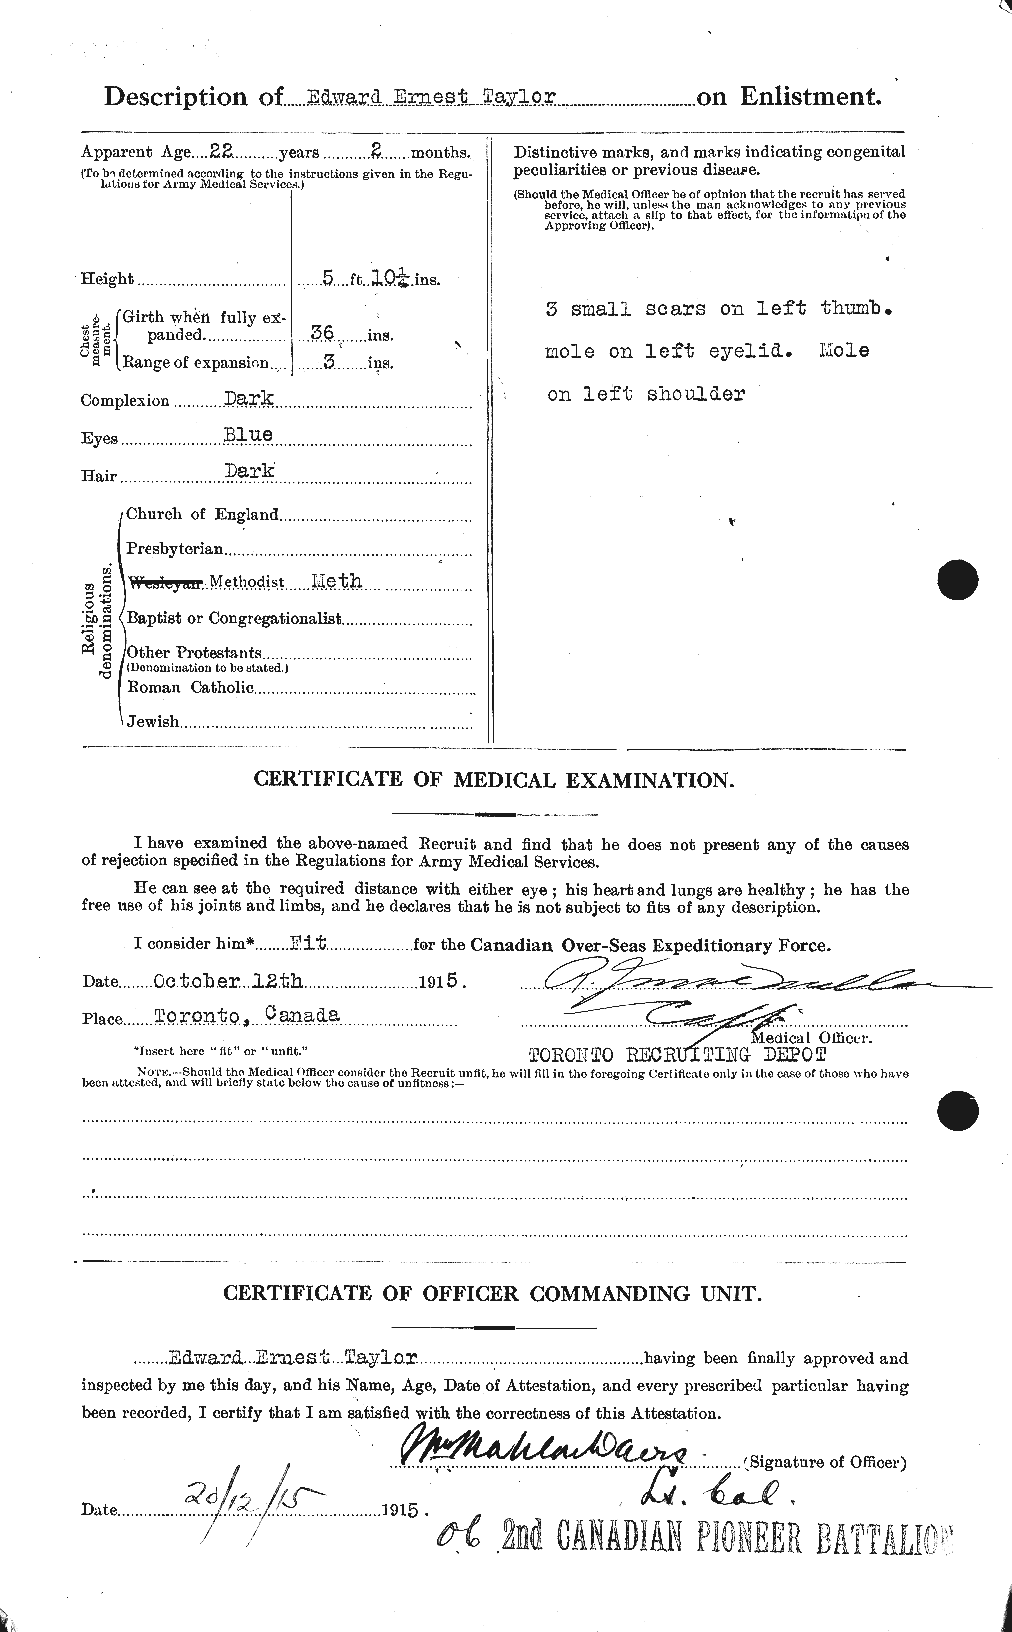 Personnel Records of the First World War - CEF 627308b